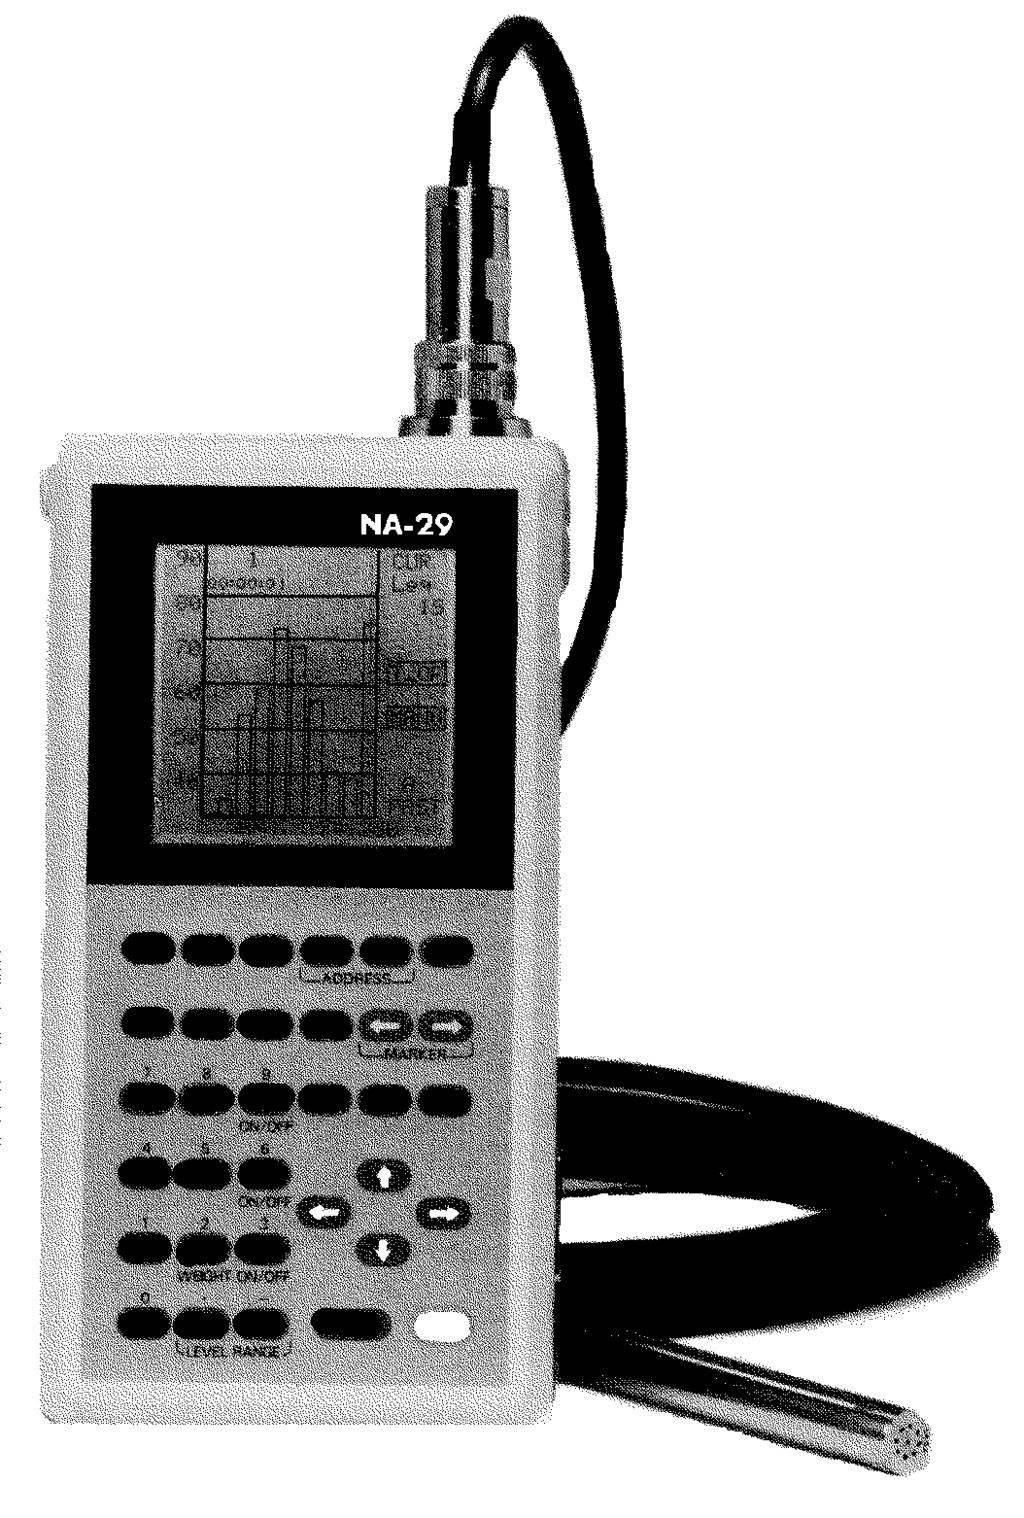 Equipment Information Company Model Measurement Range RION NA-29 27-130 db(a) Frequency Range 20-8000 Hz (9 octaves) Dynamic